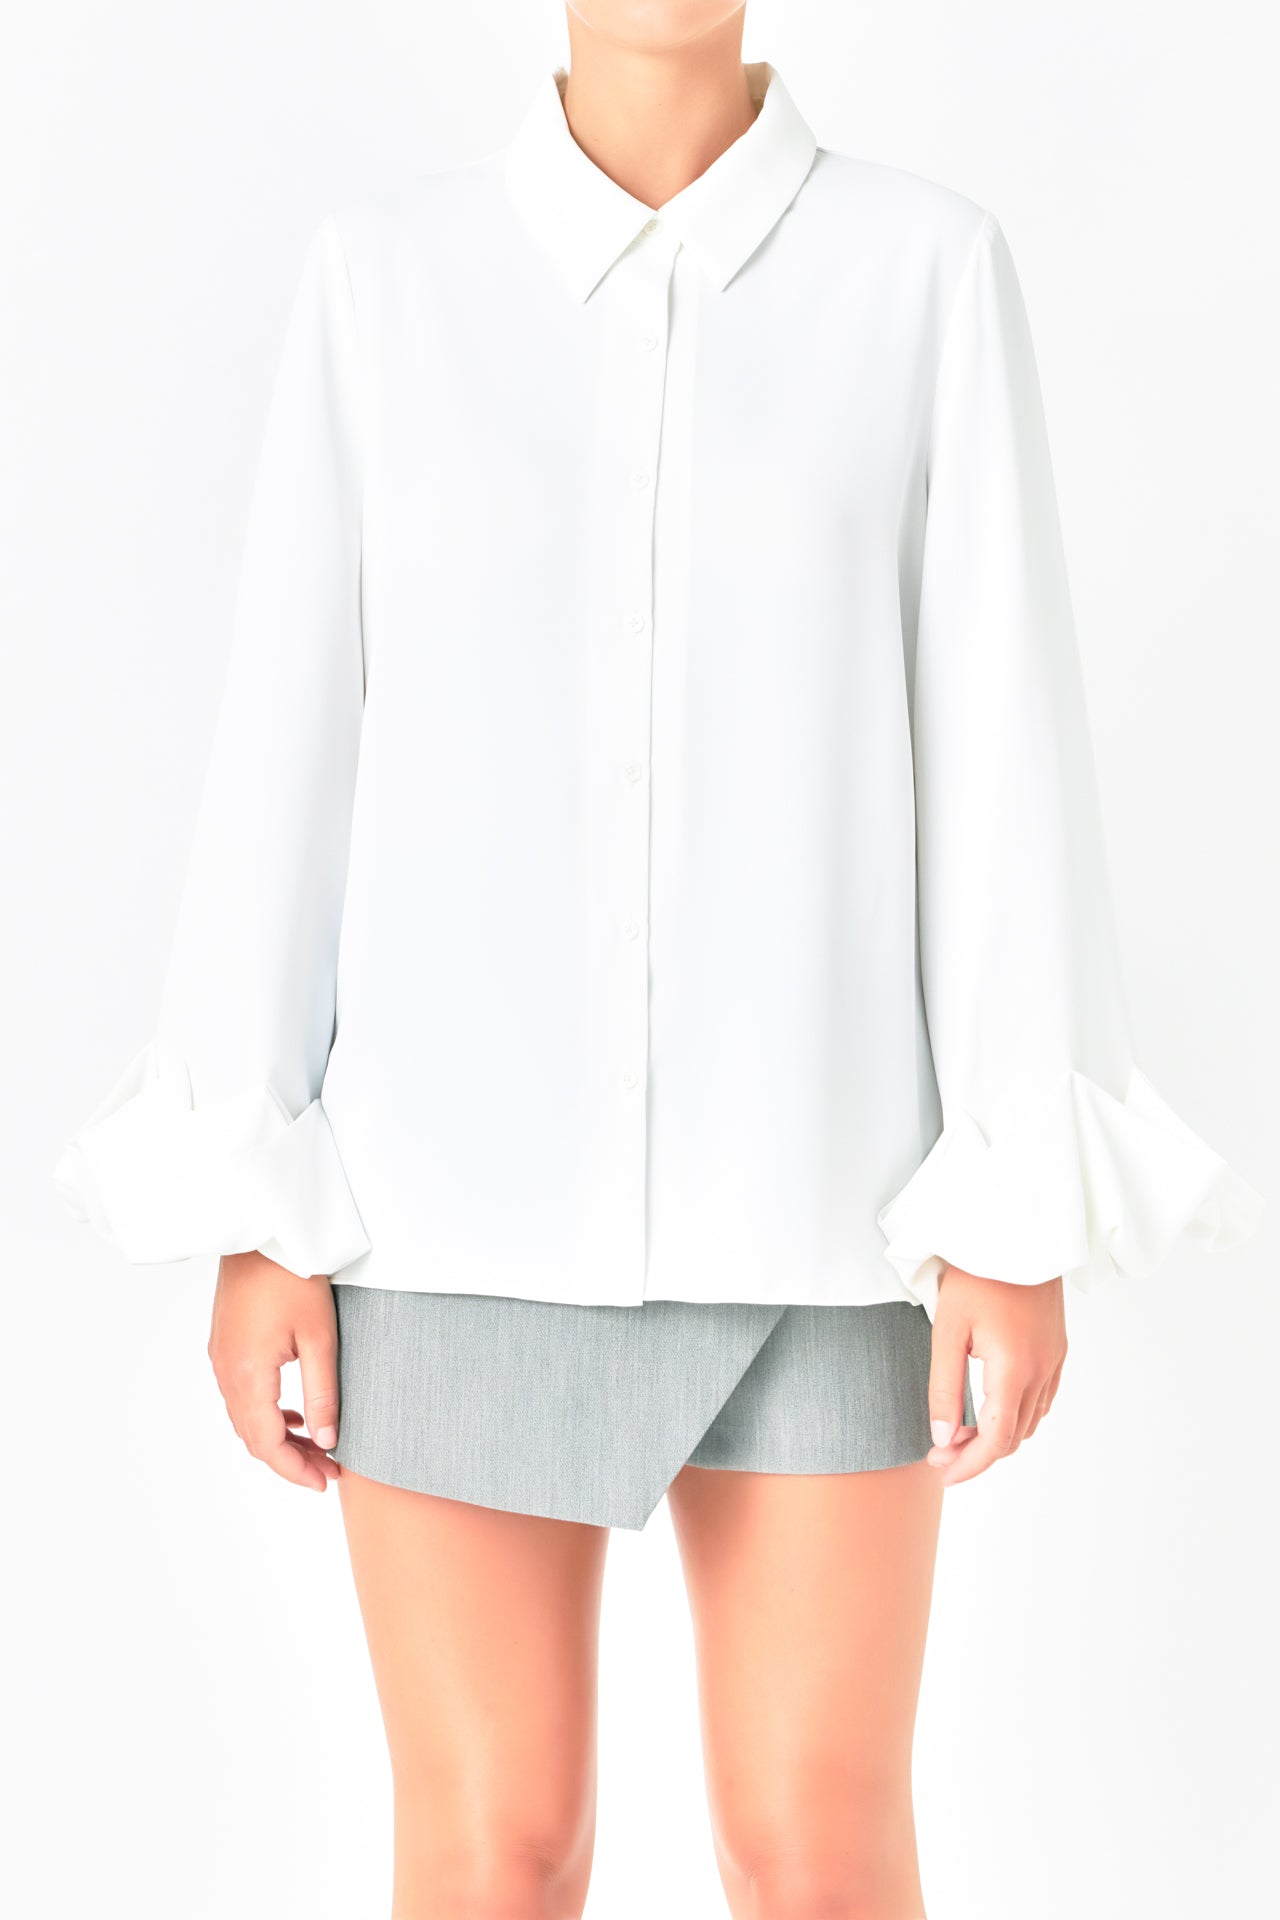 ENDLESS ROSE - Bubble Accent Dress Shirt - SHIRTS & BLOUSES available at Objectrare